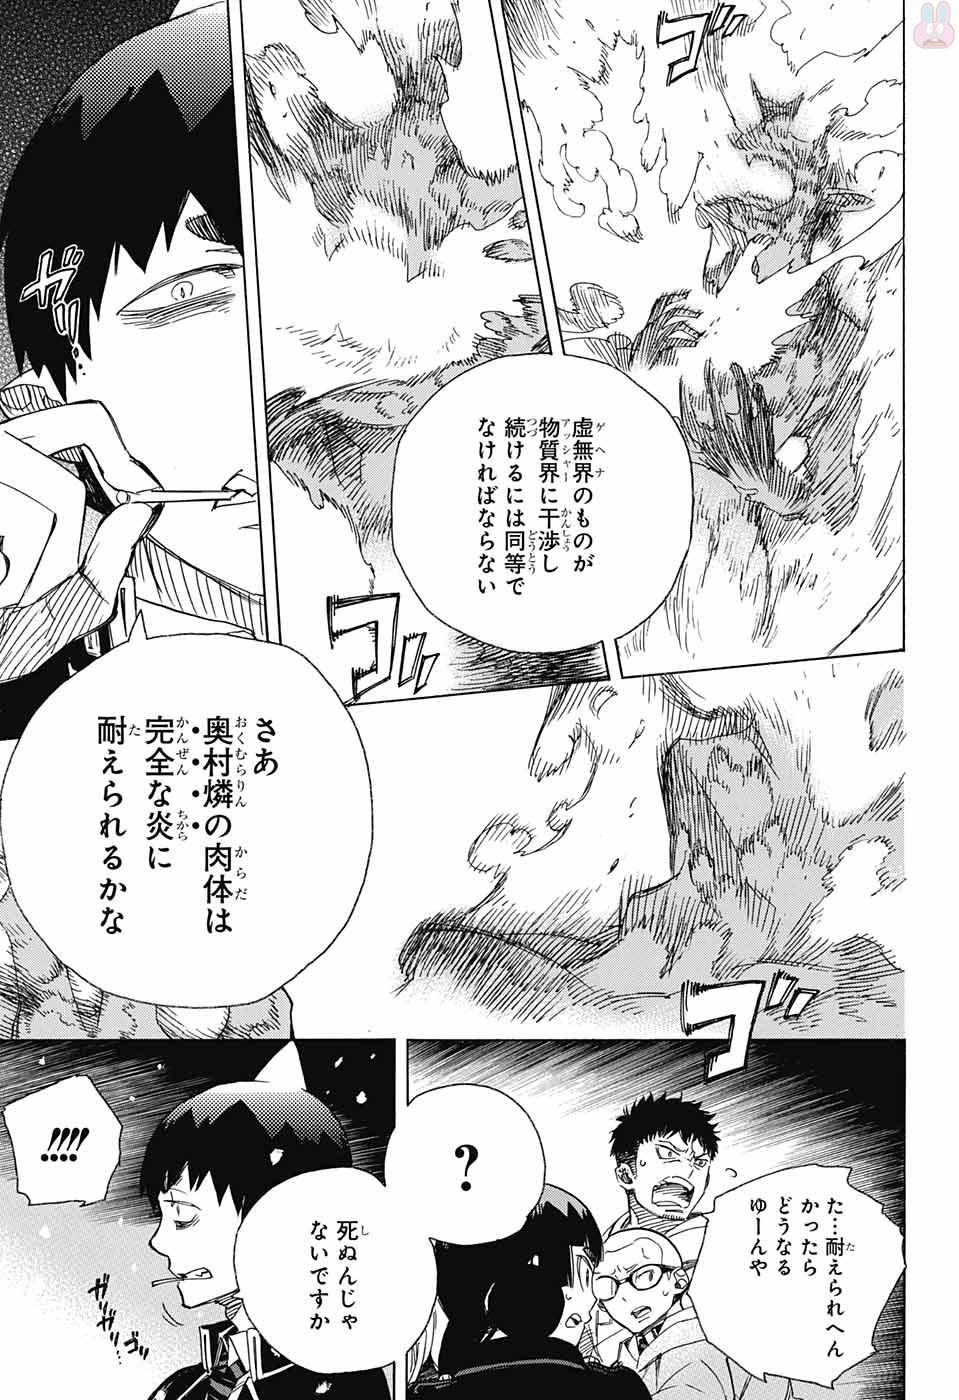 Ao no Exorcist - Chapter 98 - Page 3